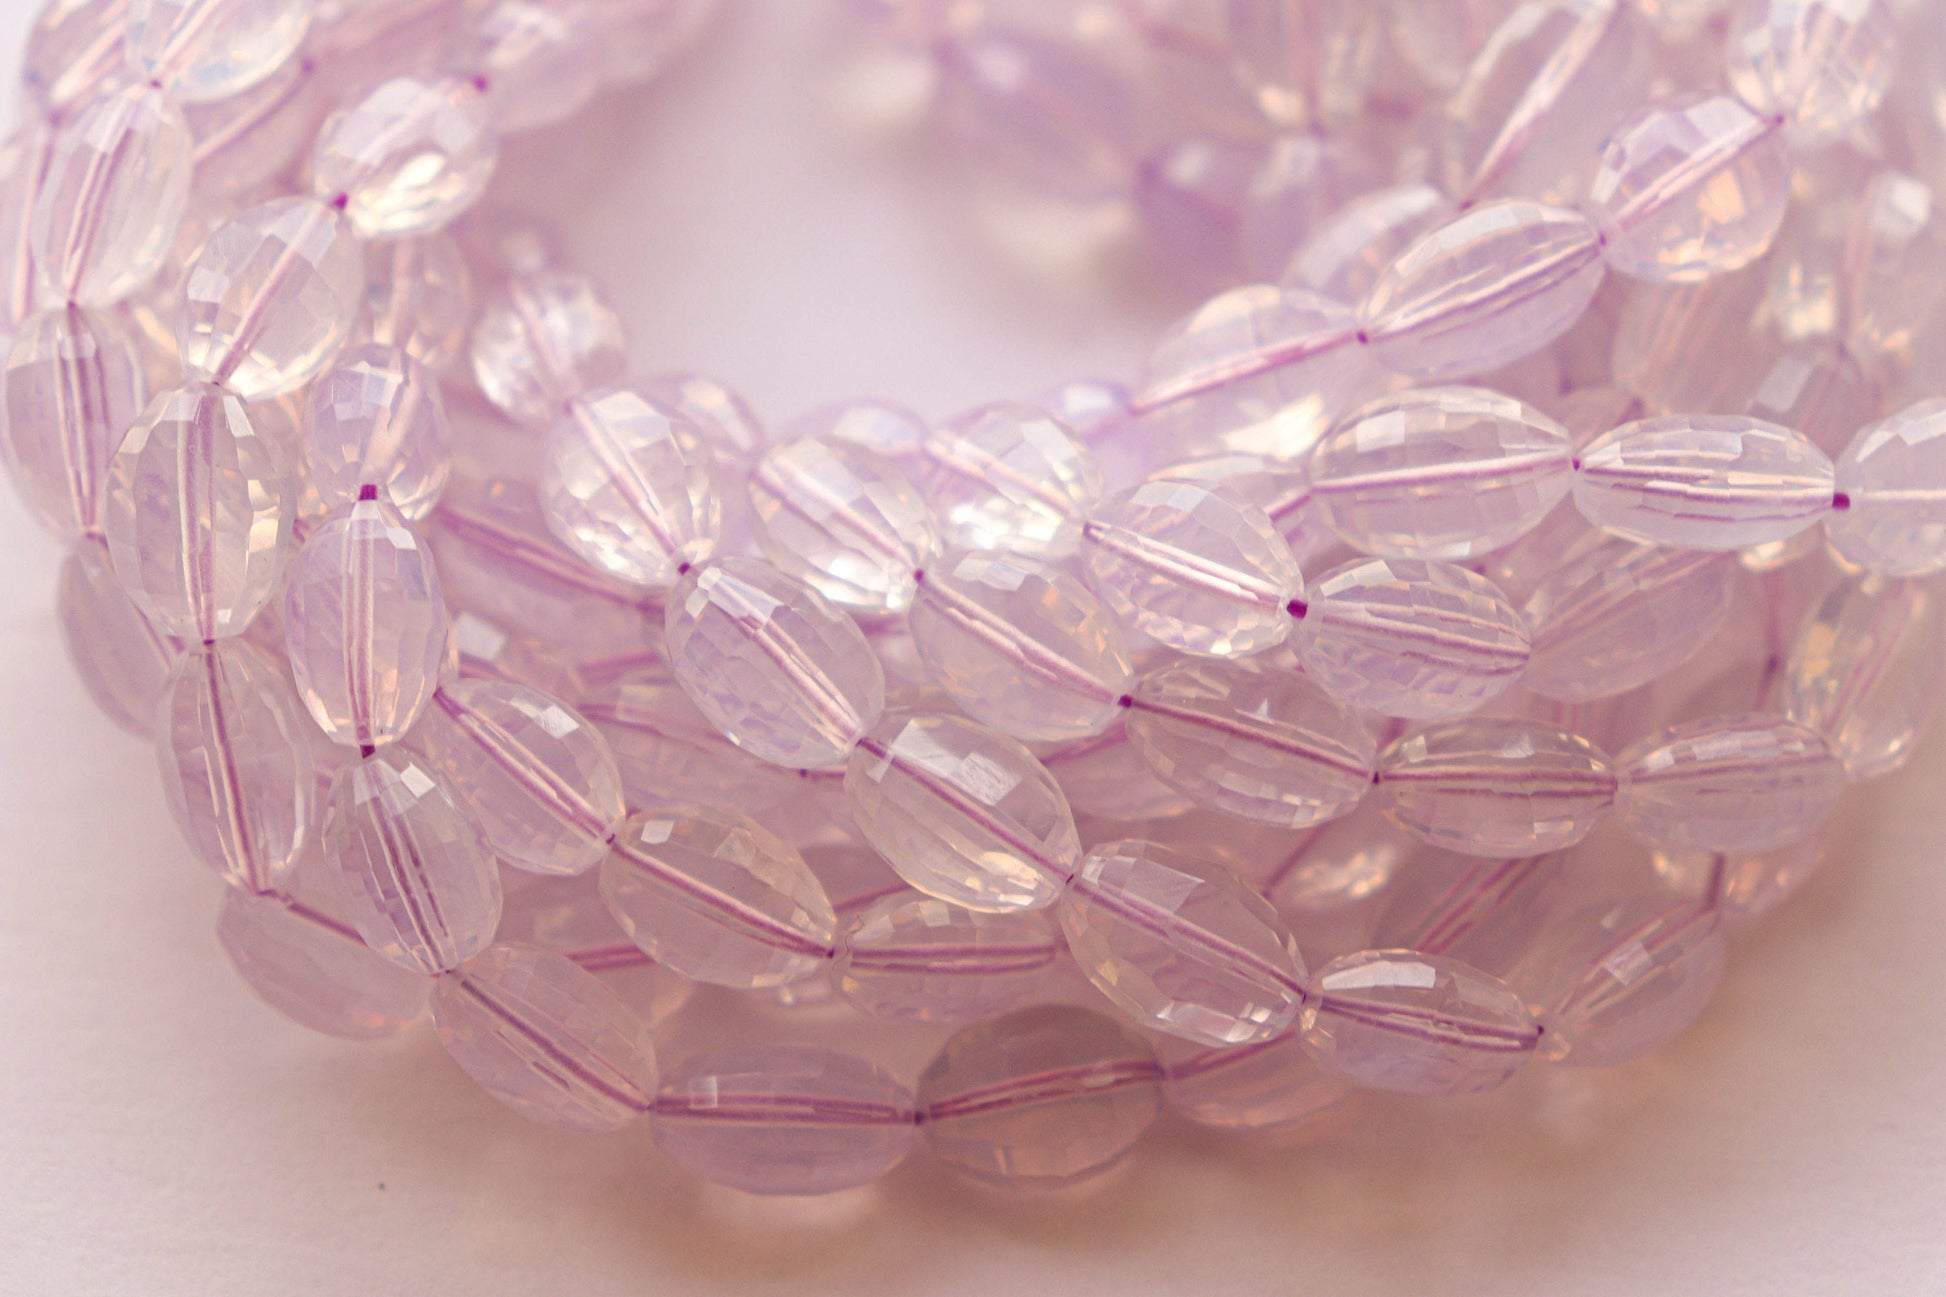 Scorolite Lavender Quartz Oval Shape Step Cut Beads | 6x9mm to 10x13mm | 40 Pieces/17 inch String | Natural Gemstone | Beadsforyourjewellery Beadsforyourjewelry